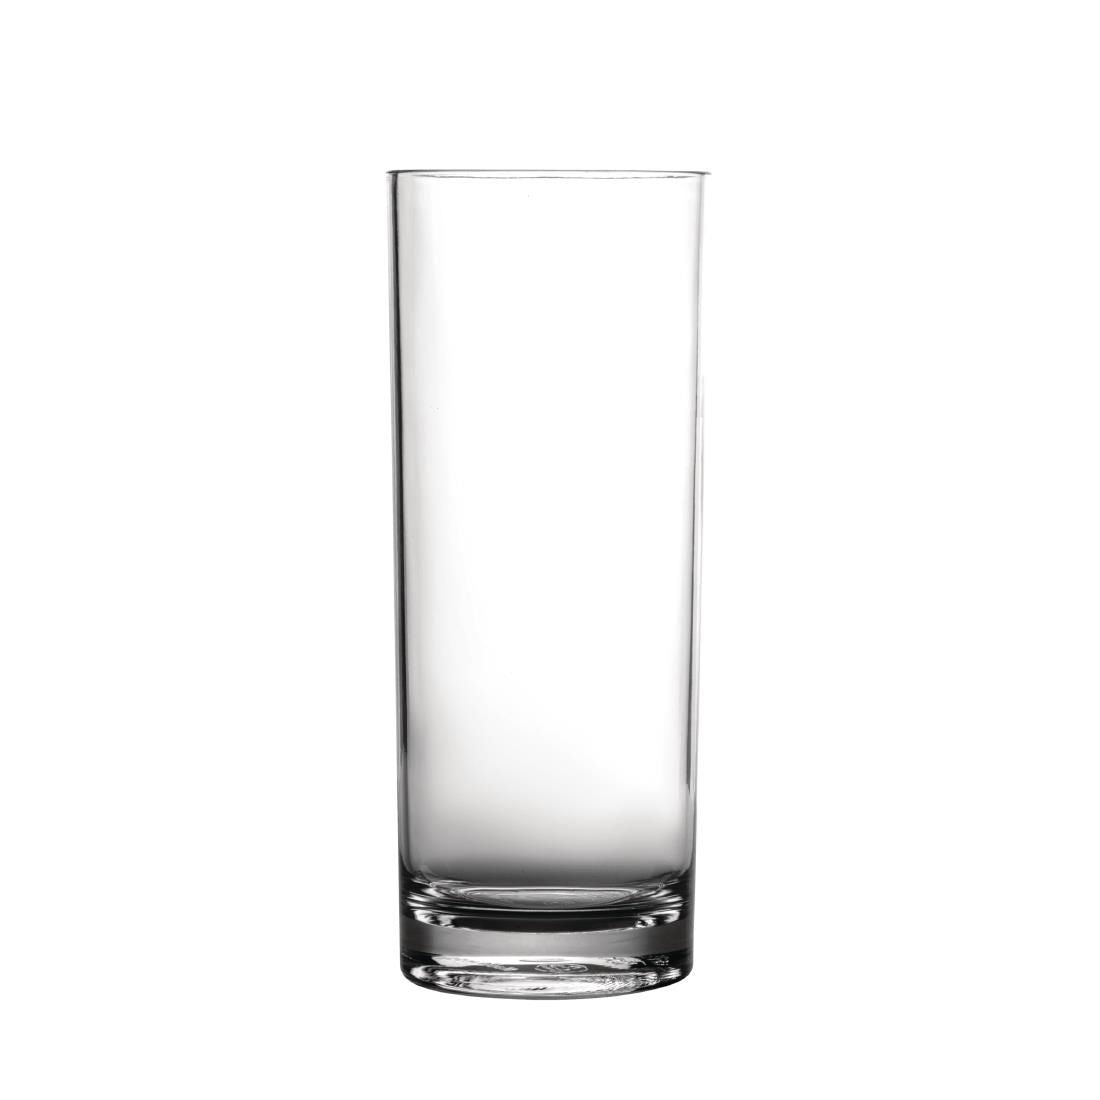 DC924 Kristallon Polycarbonate Hi Ball Glasses Clear 360ml (Pack of 6) JD Catering Equipment Solutions Ltd